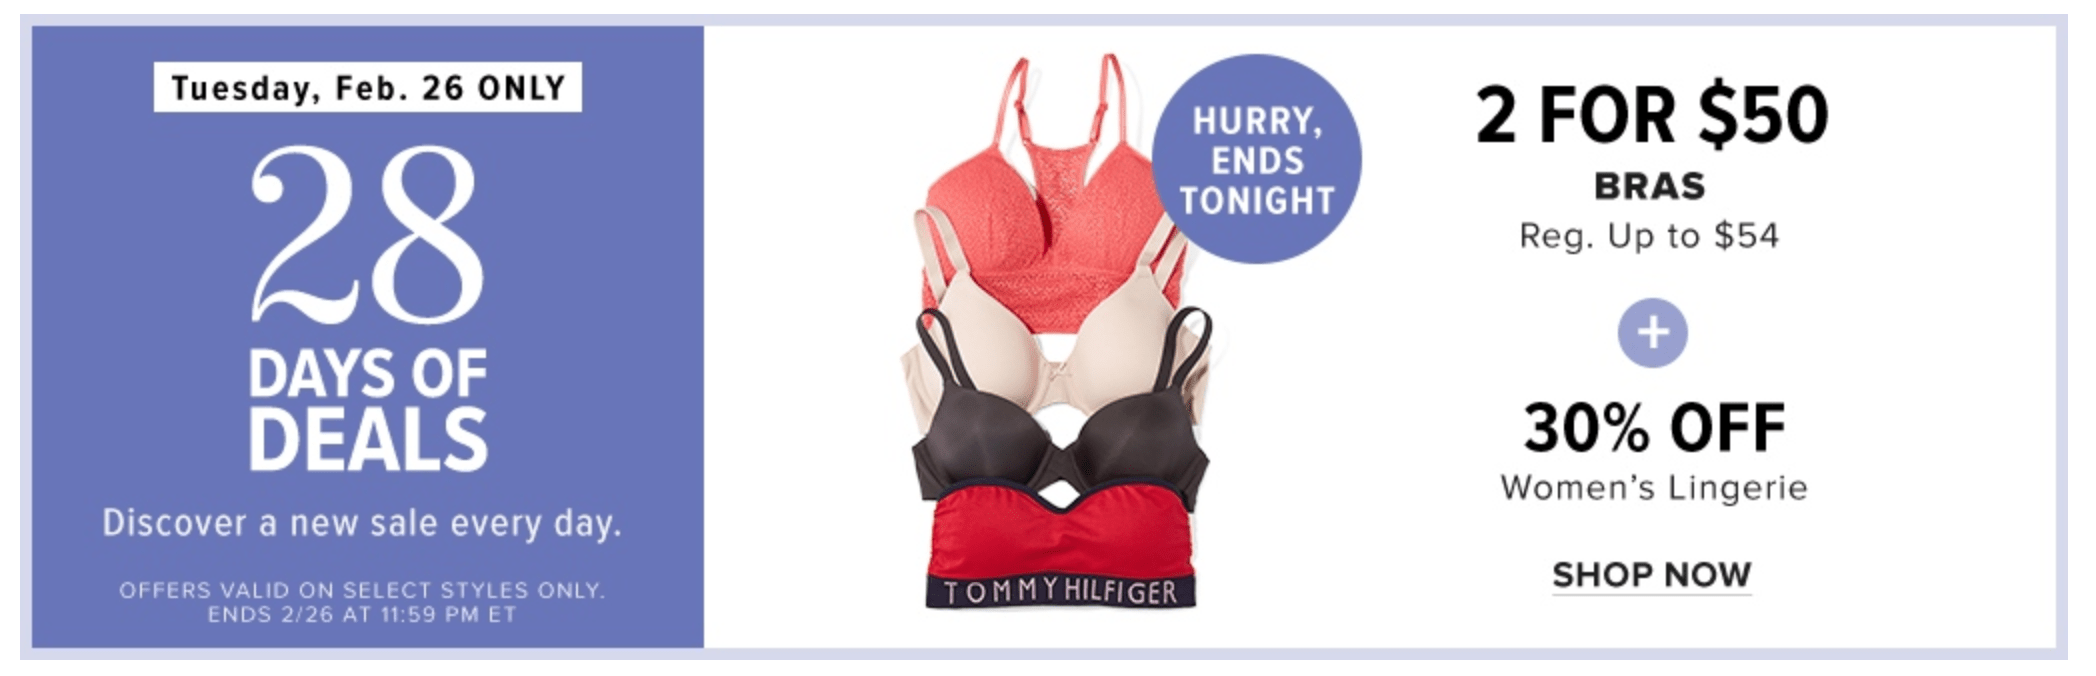 Hudson’s Bay Canada Deals: 2 for $50 Bras + 30% Off Lingerie + Up to 30 ...